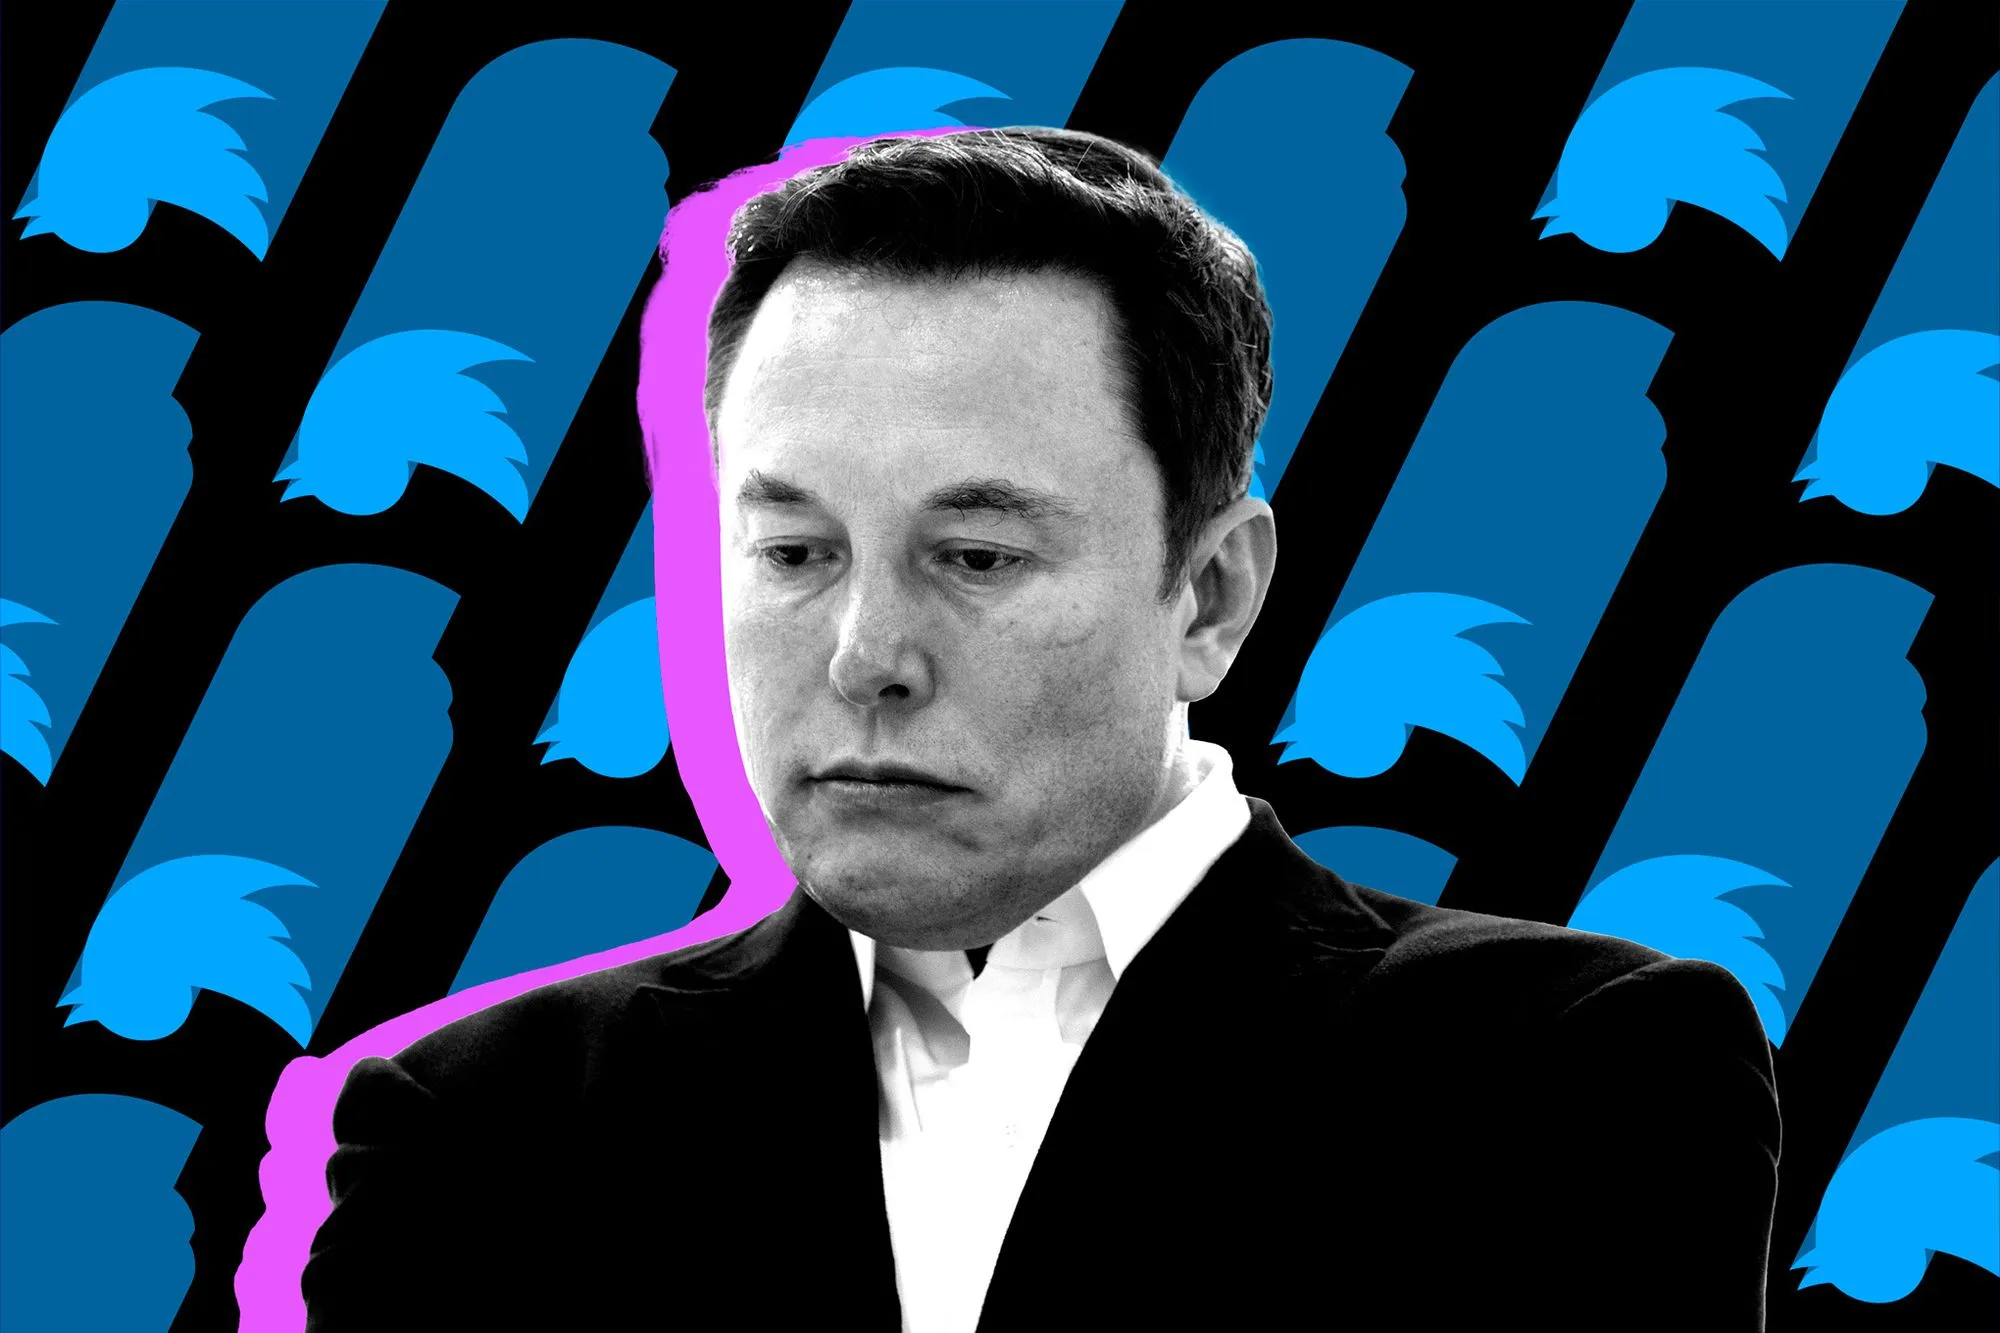 Elon Musk lifts suspensions of Twitter accounts of journalists after backlash